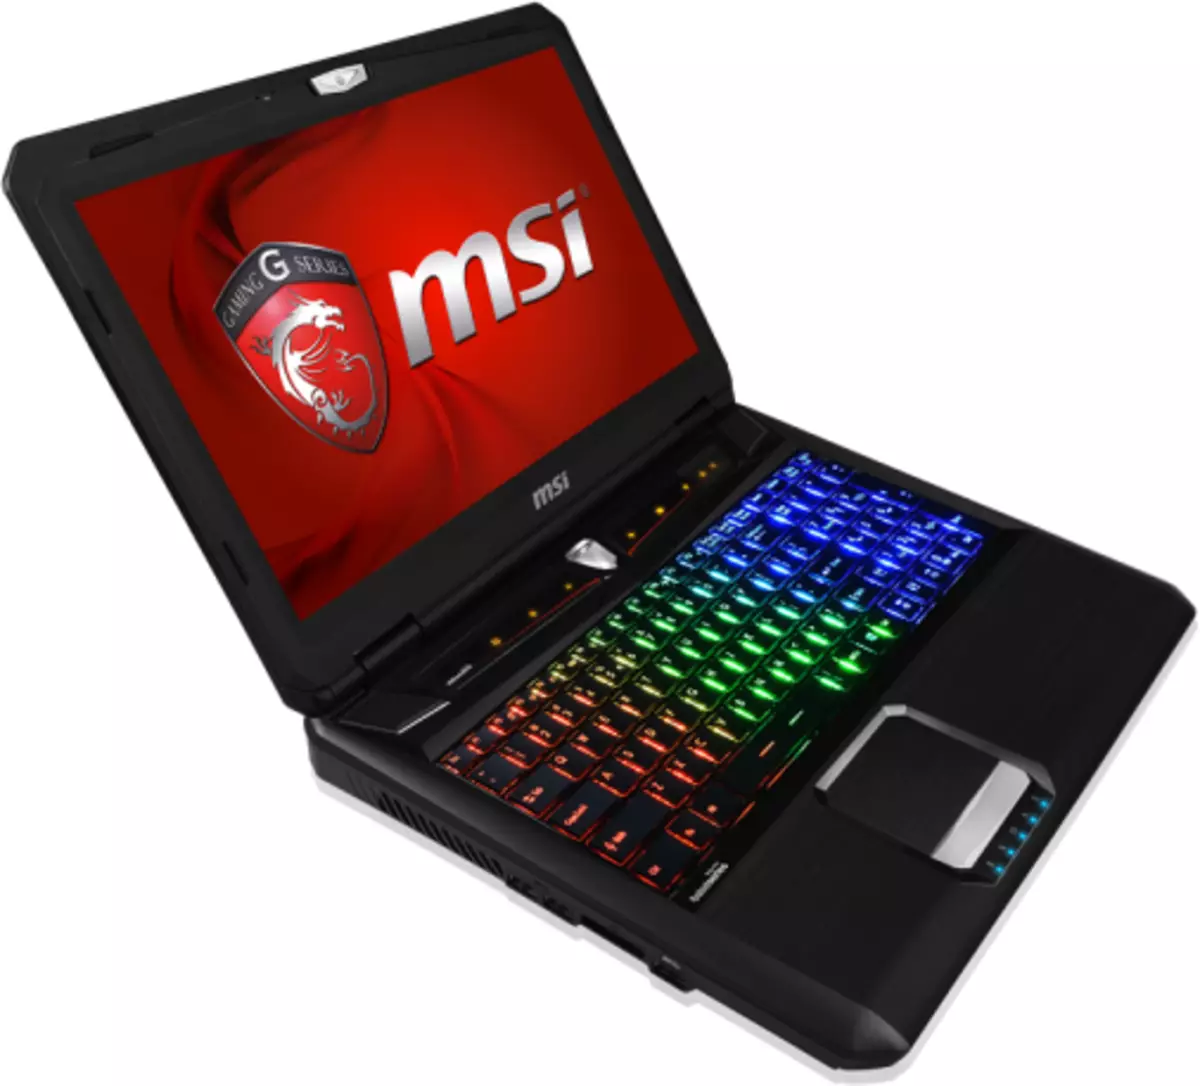 Gaming Laptop MSI GT60 20D 3K IPS Edition